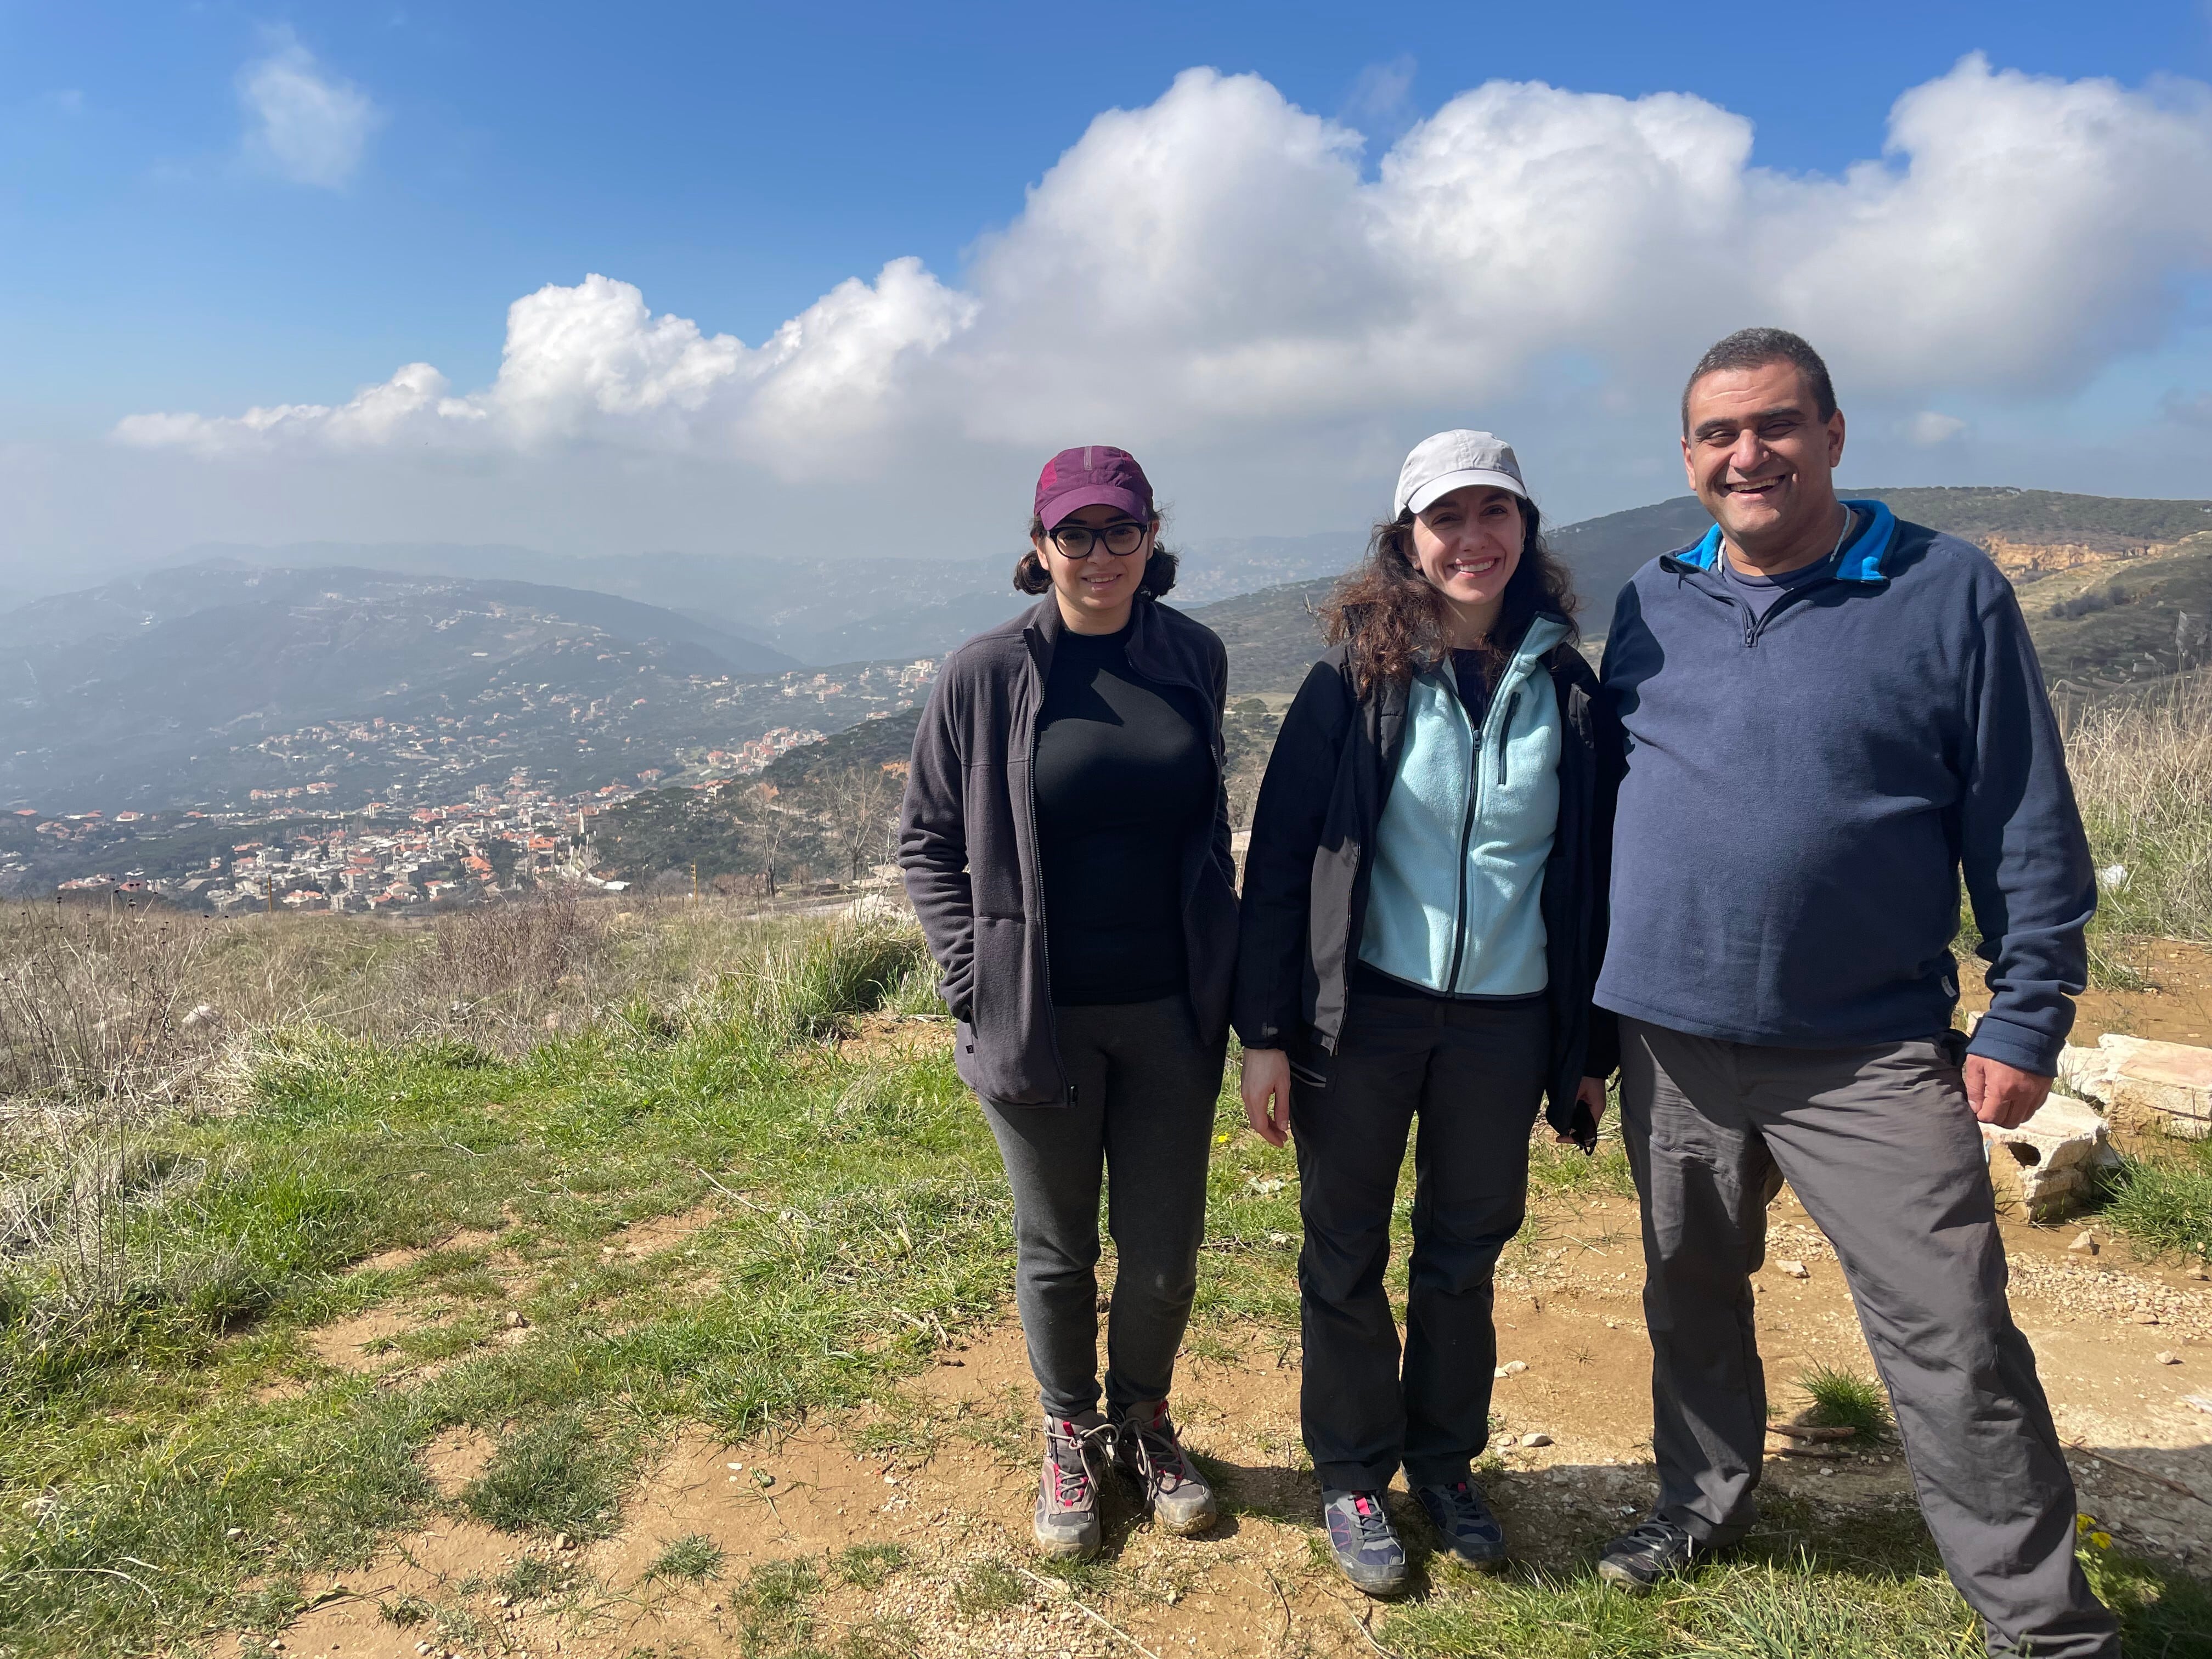 Paleo-entomologist Marina Hakim (left), geologist Sibelle Maksoud, and paleontologist Dany Azar stand atop a slope in central Lebanon on a recent trip to search for ancient amber inclusions.